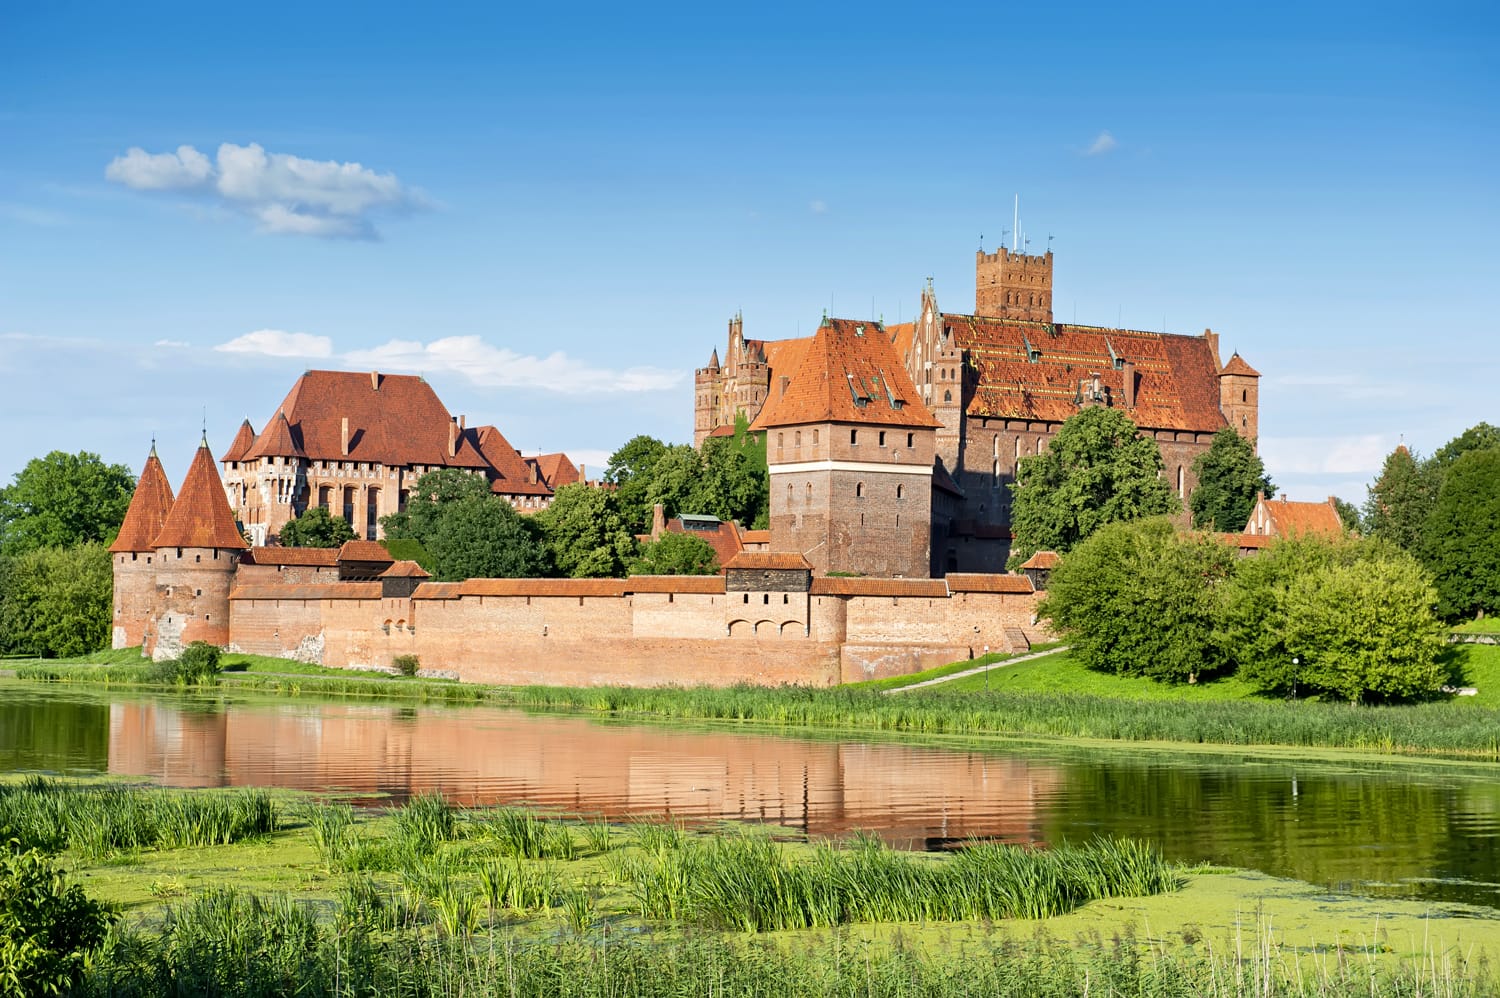 Panoramic view an old Teutonic Knights' fortress in Malbork, Poland.